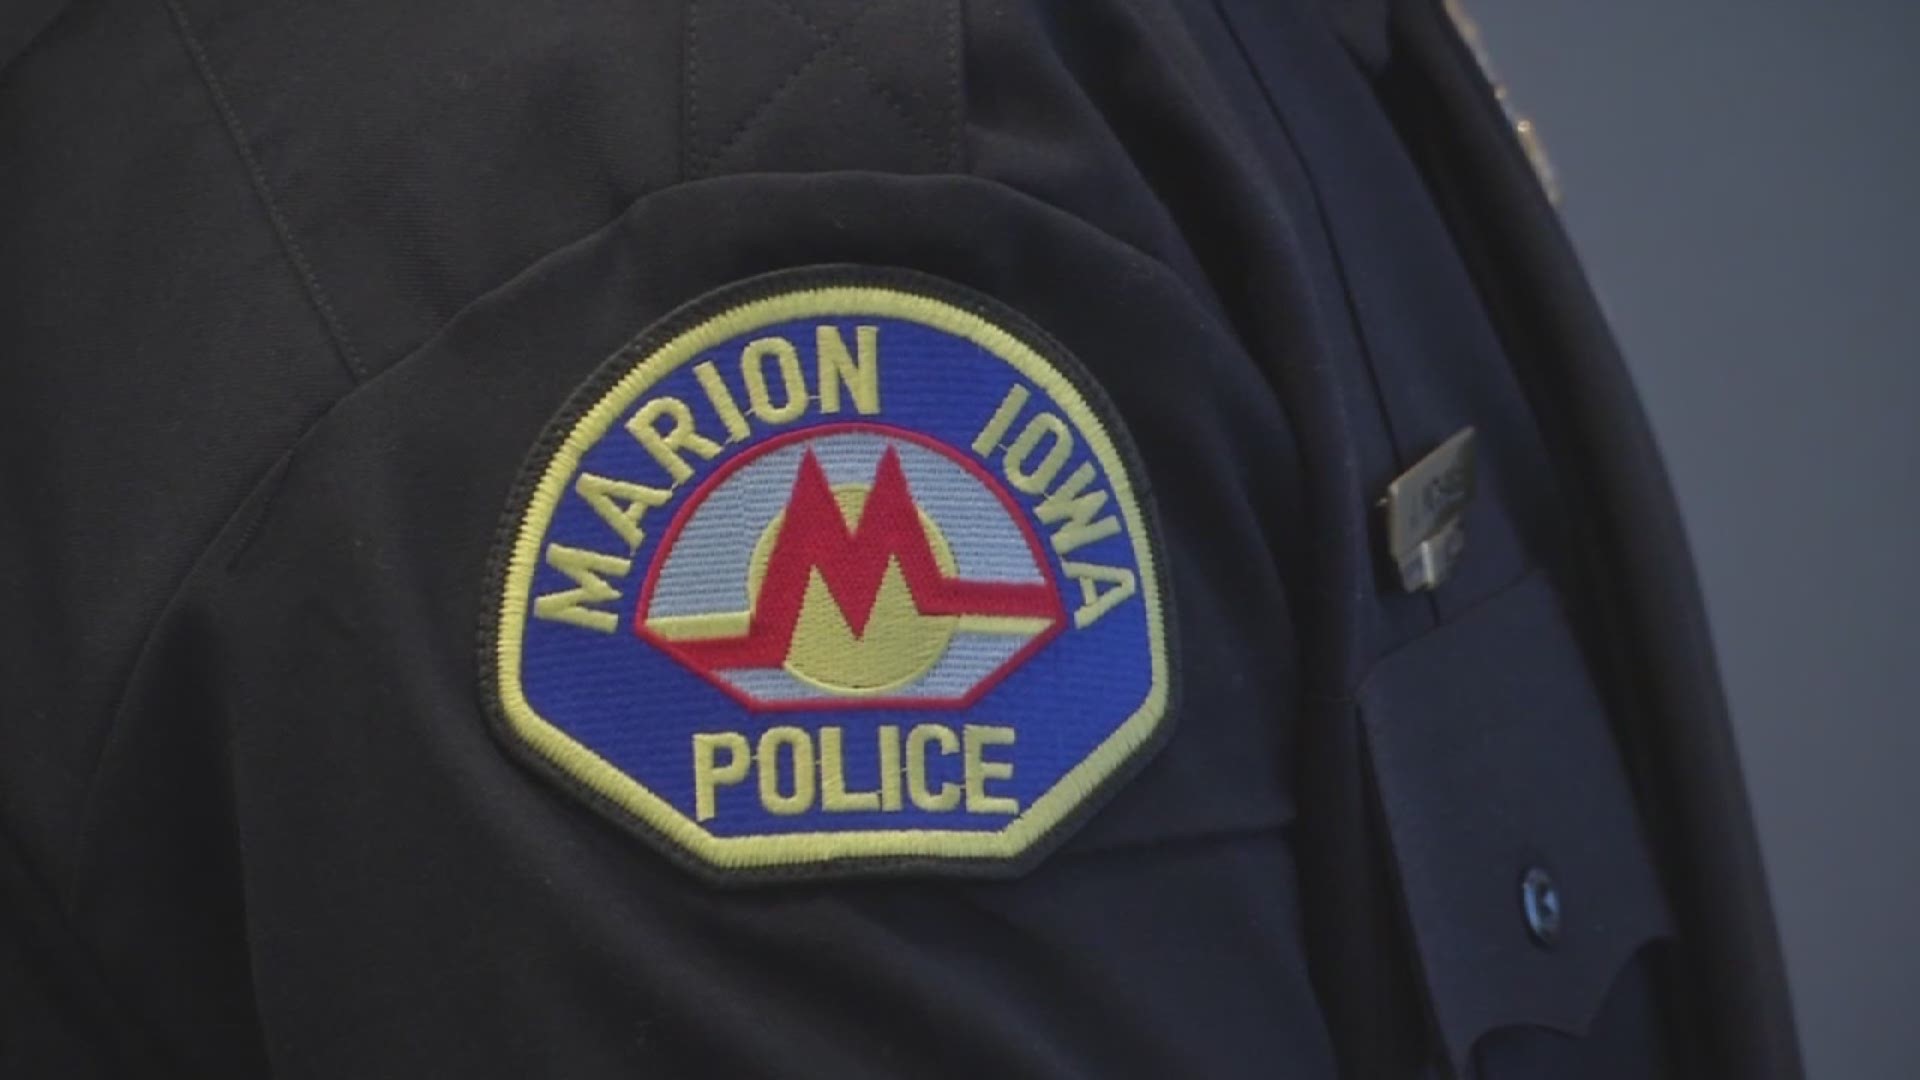 "The state sets some pretty rigorous standards and we have to abide by that," said Ofc. Tom Daubs with the Marion Police Department.